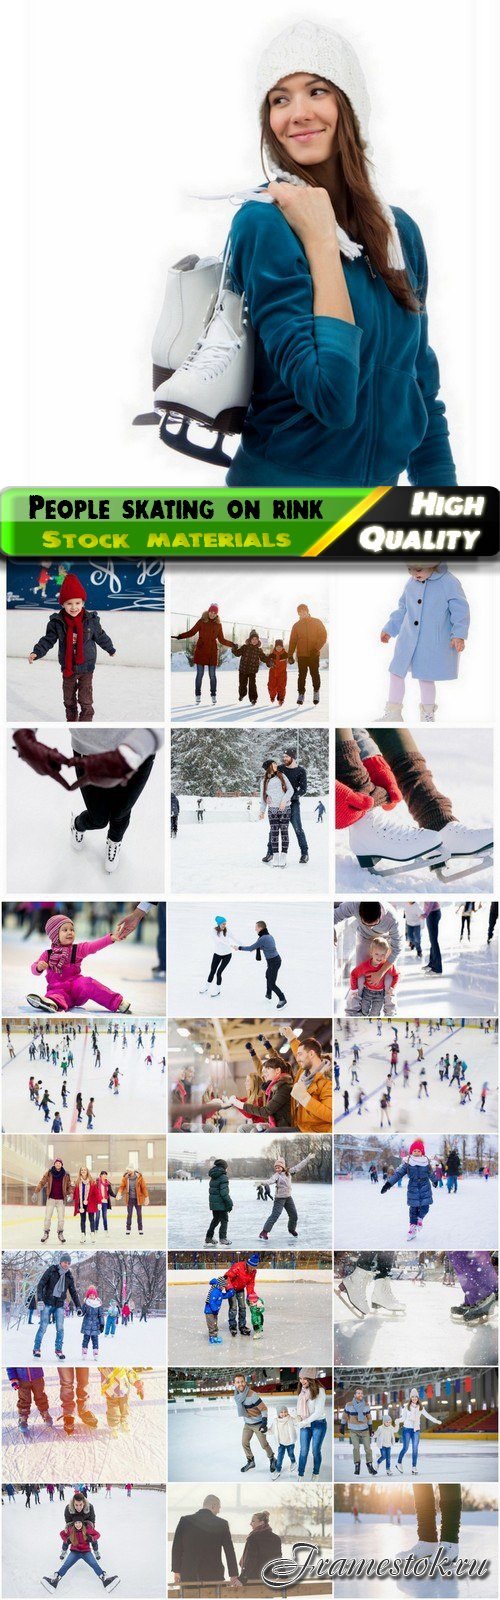 Sport people relax skating at the rink in skates - 25 HQ Jpg